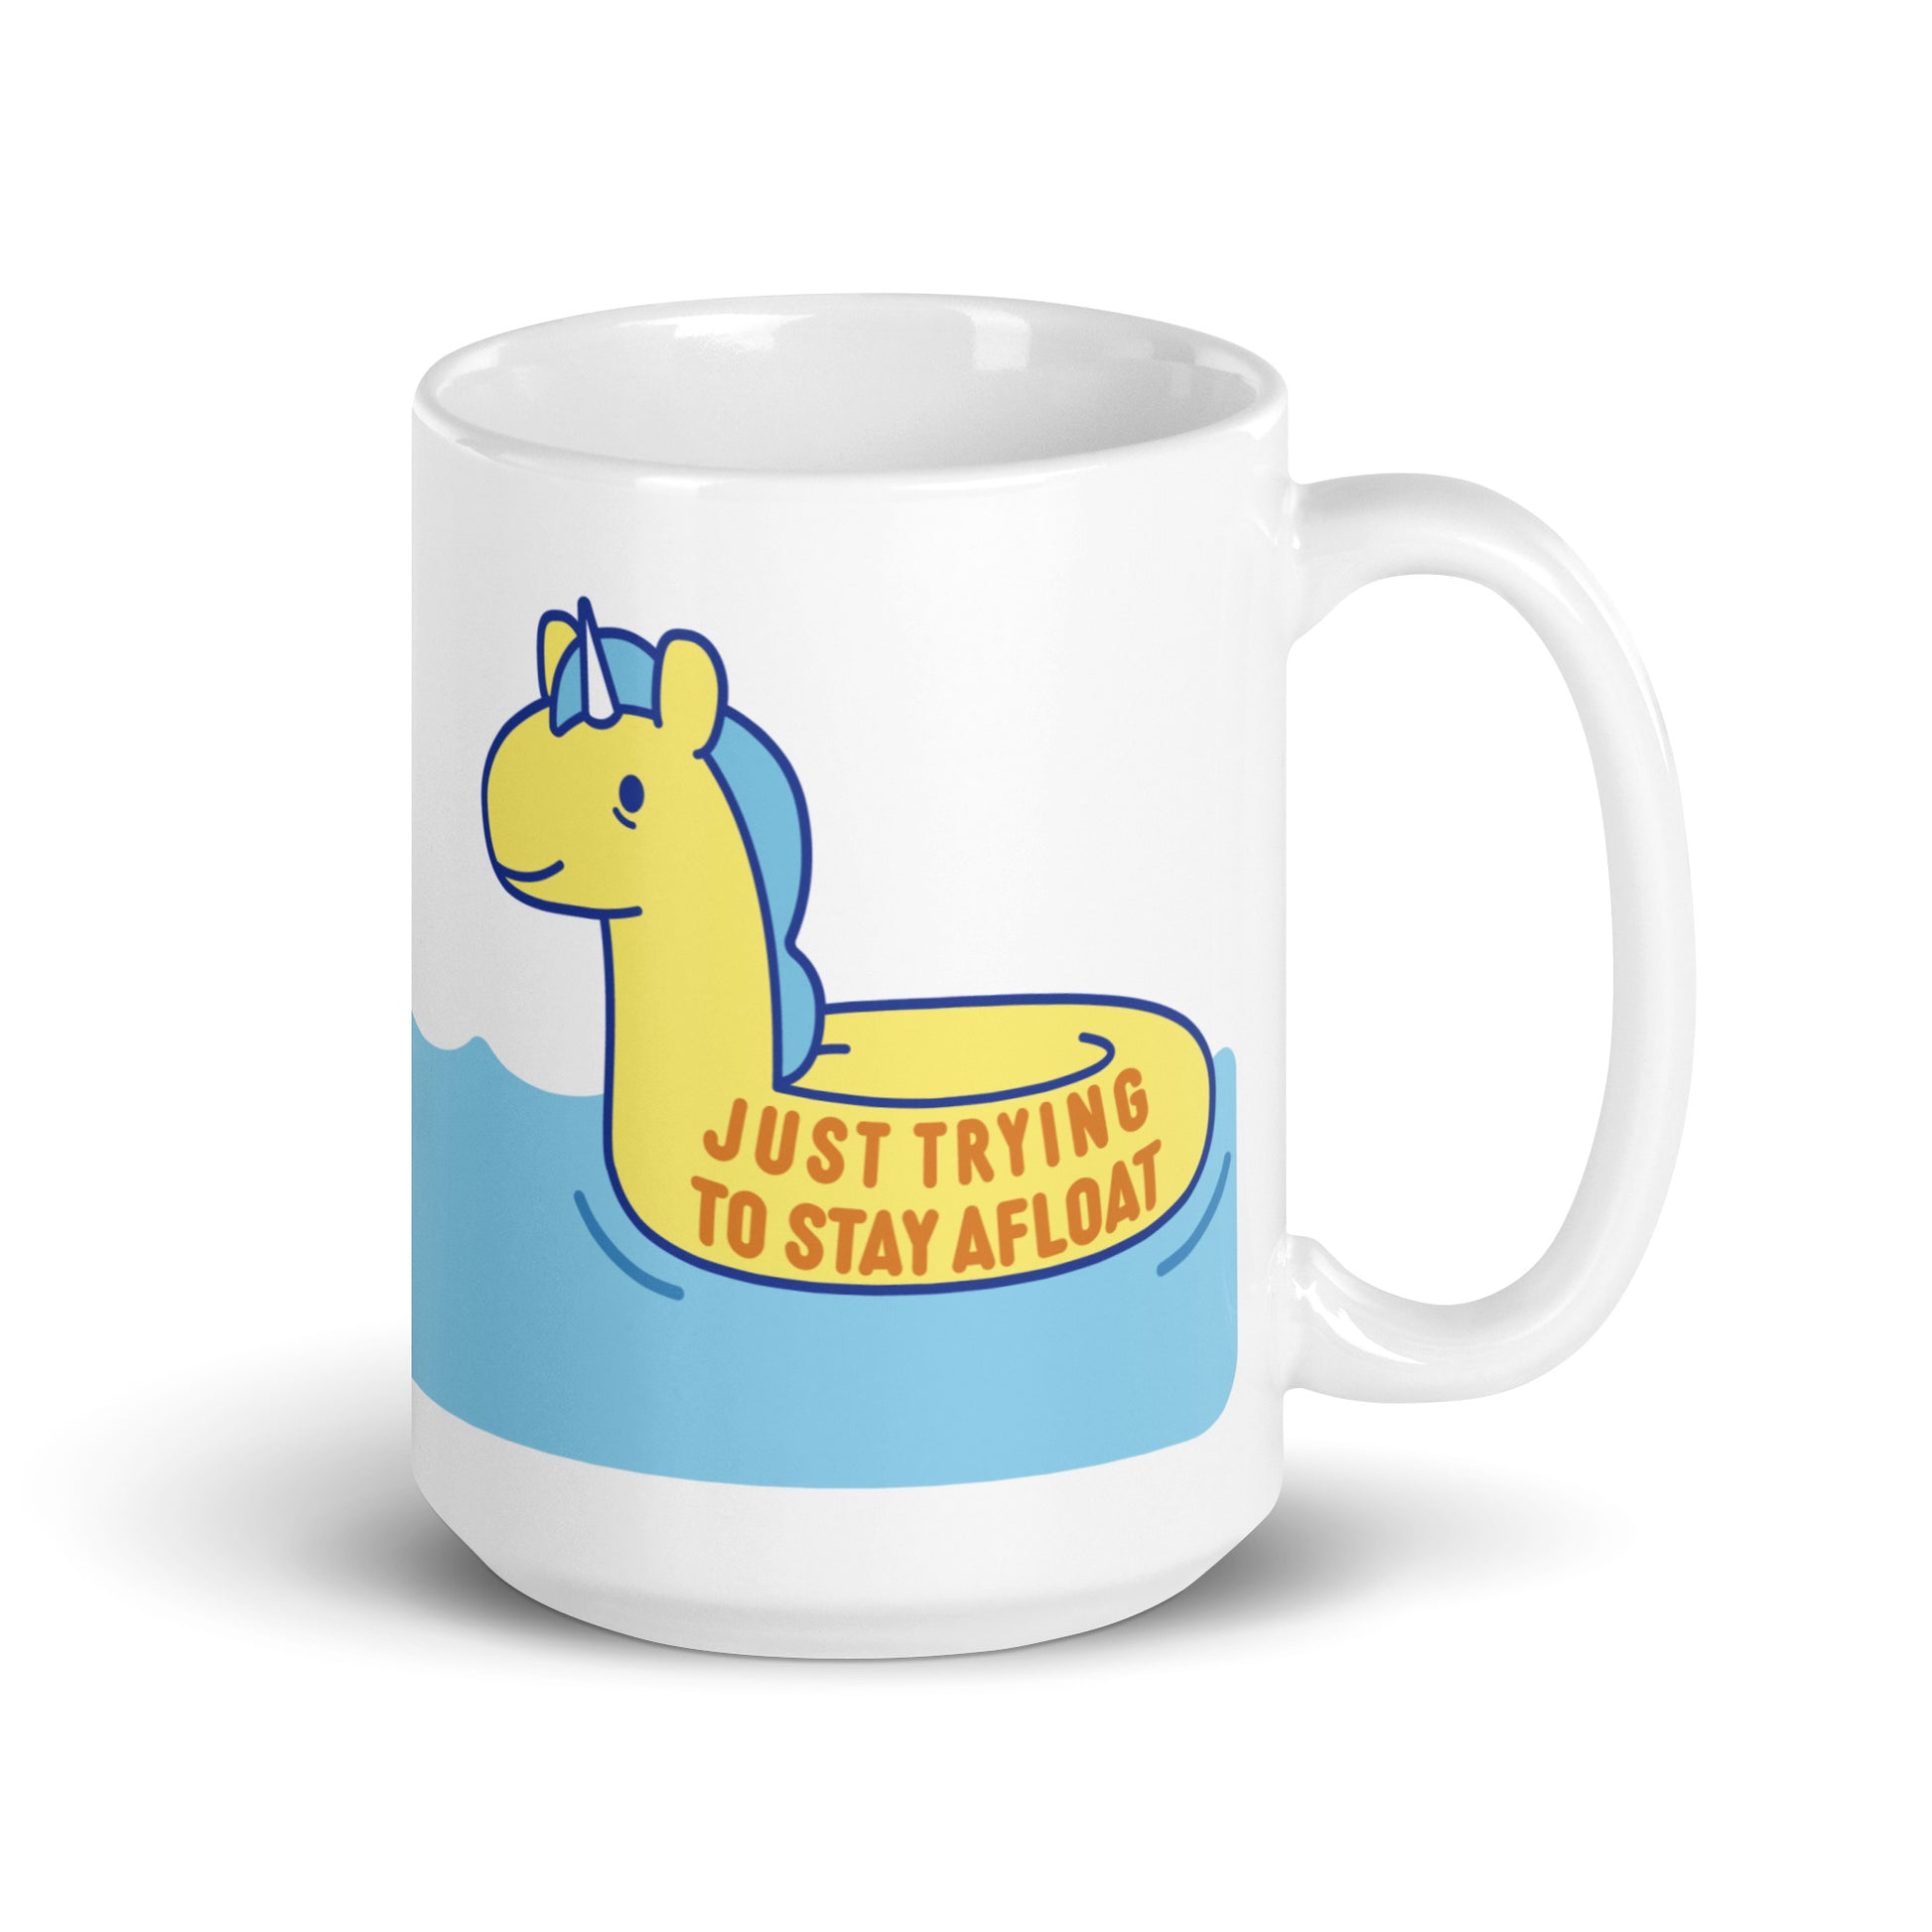 A white 15oz ceramic mug with a yellow unicorn pool float floating on water and text reading "Just trying to stay afloat"